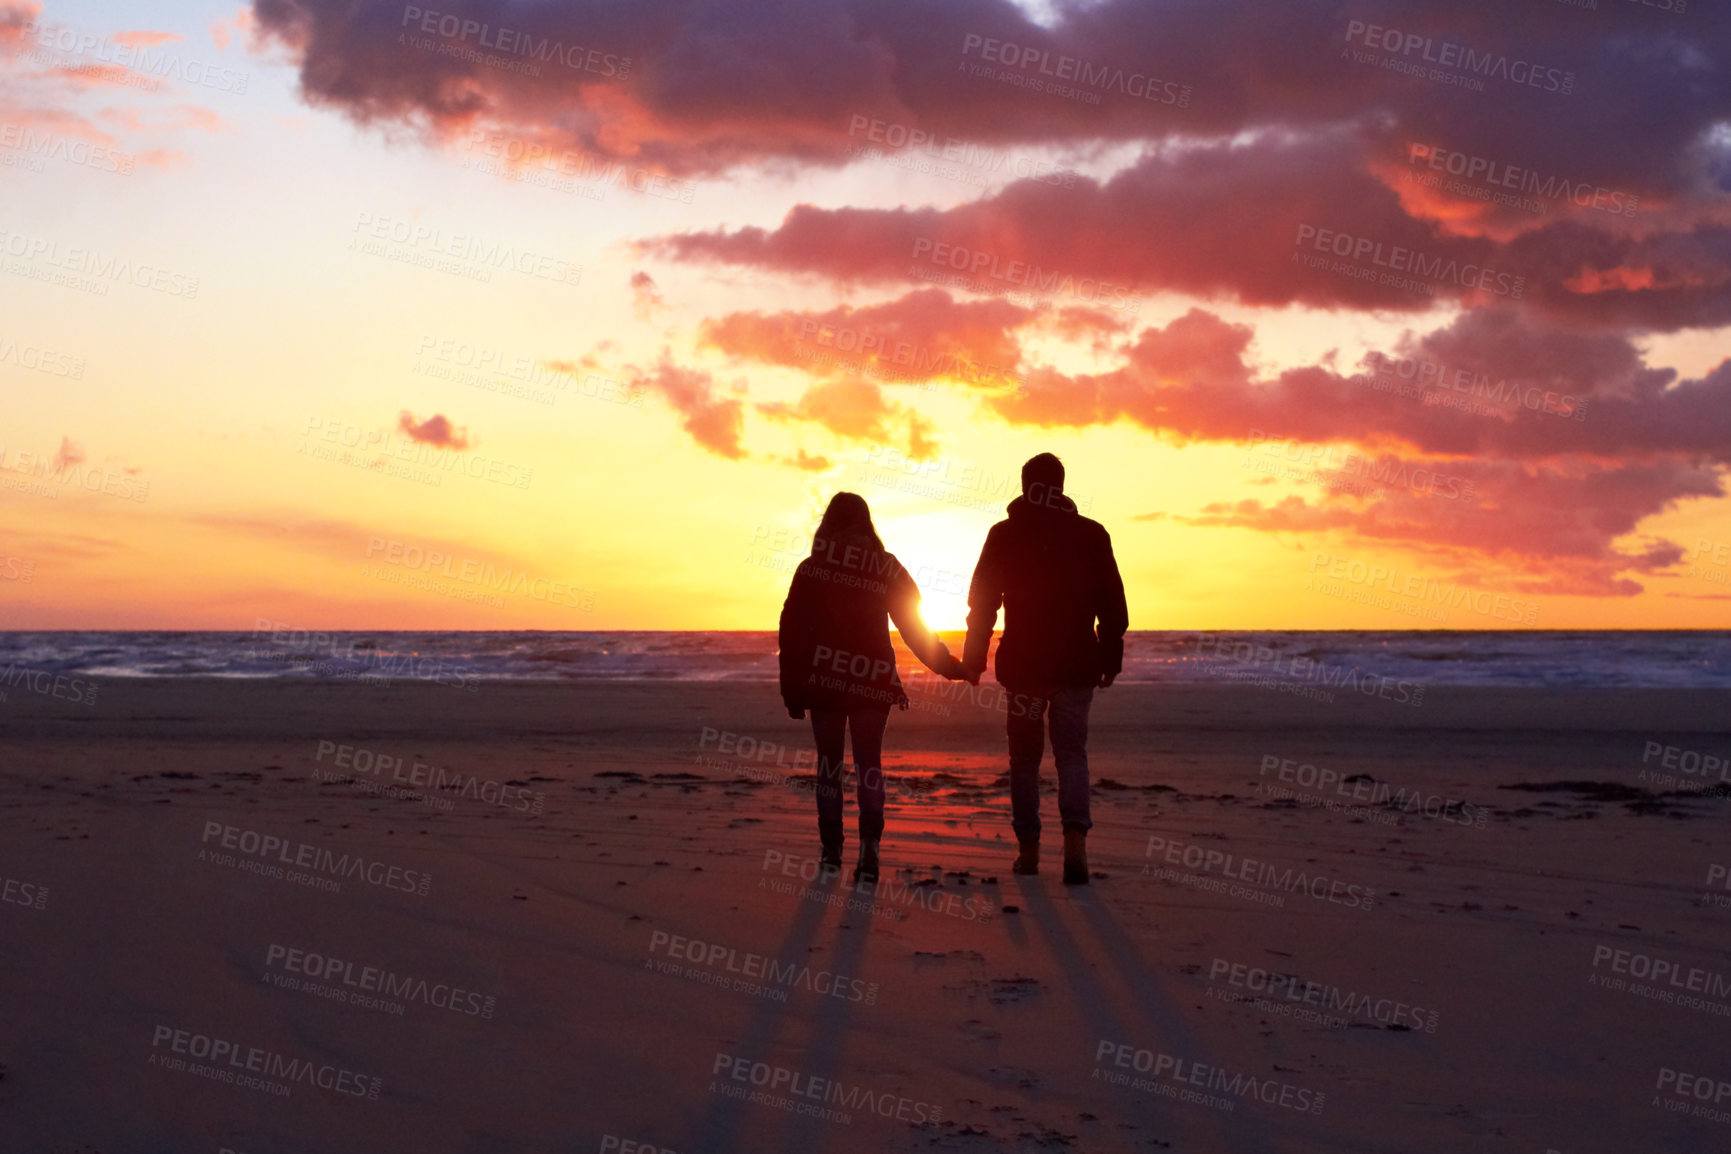 Buy stock photo Silhouette of a couple going for a walk on the beach at sunset